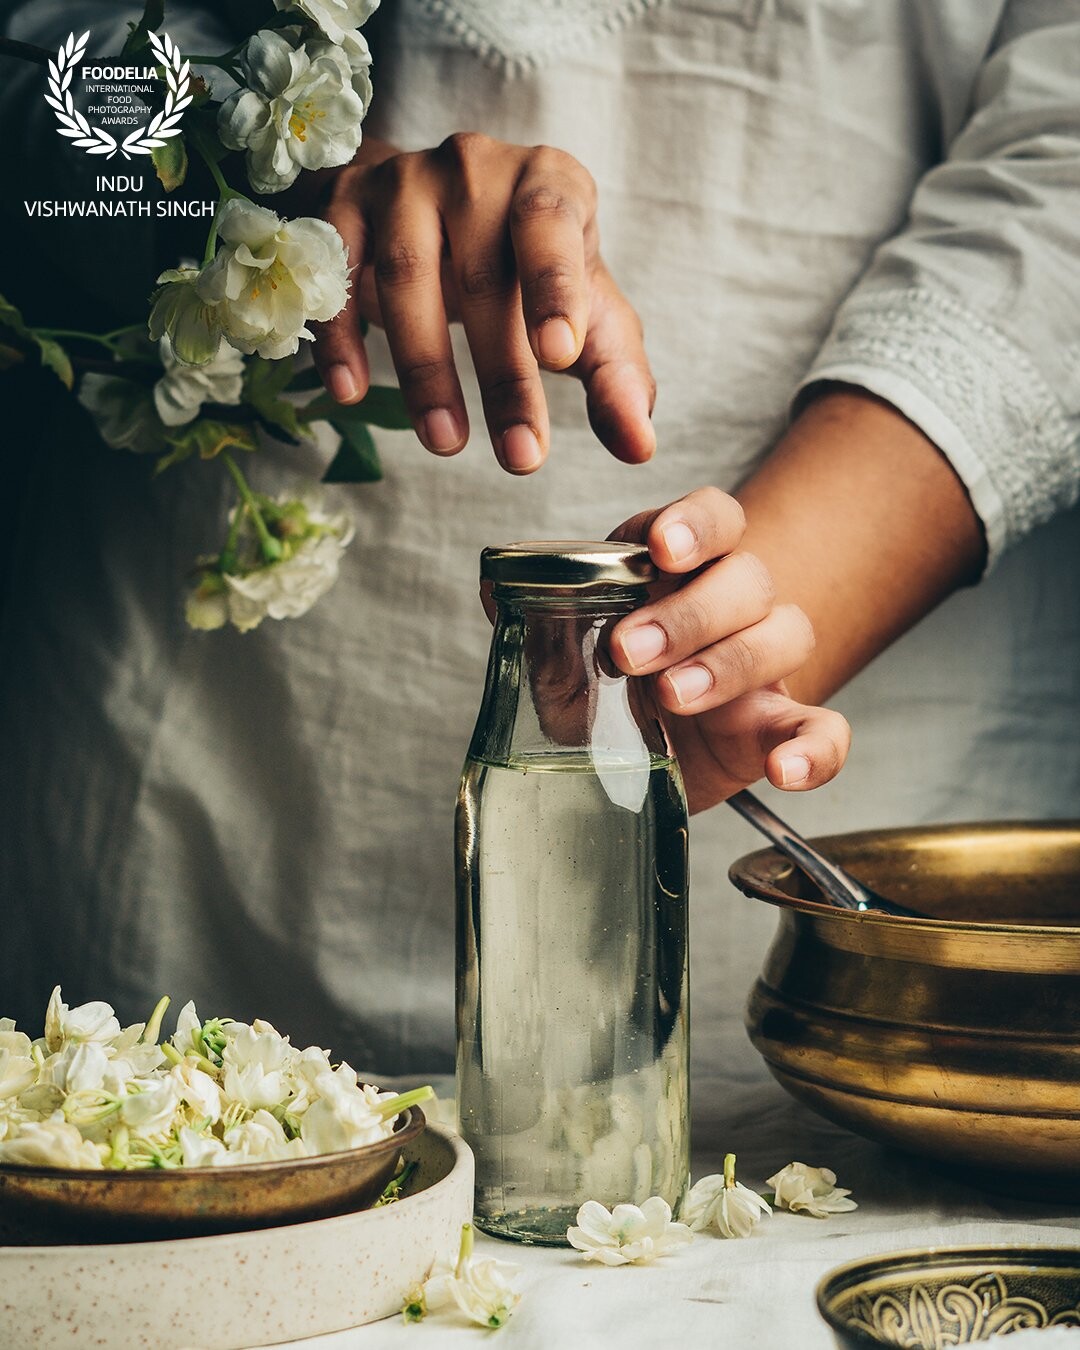 Making jasmine syrup. The spring season around the globe celebrates making lilac syrups and here in India, I love making batches of Jasmine syrup.